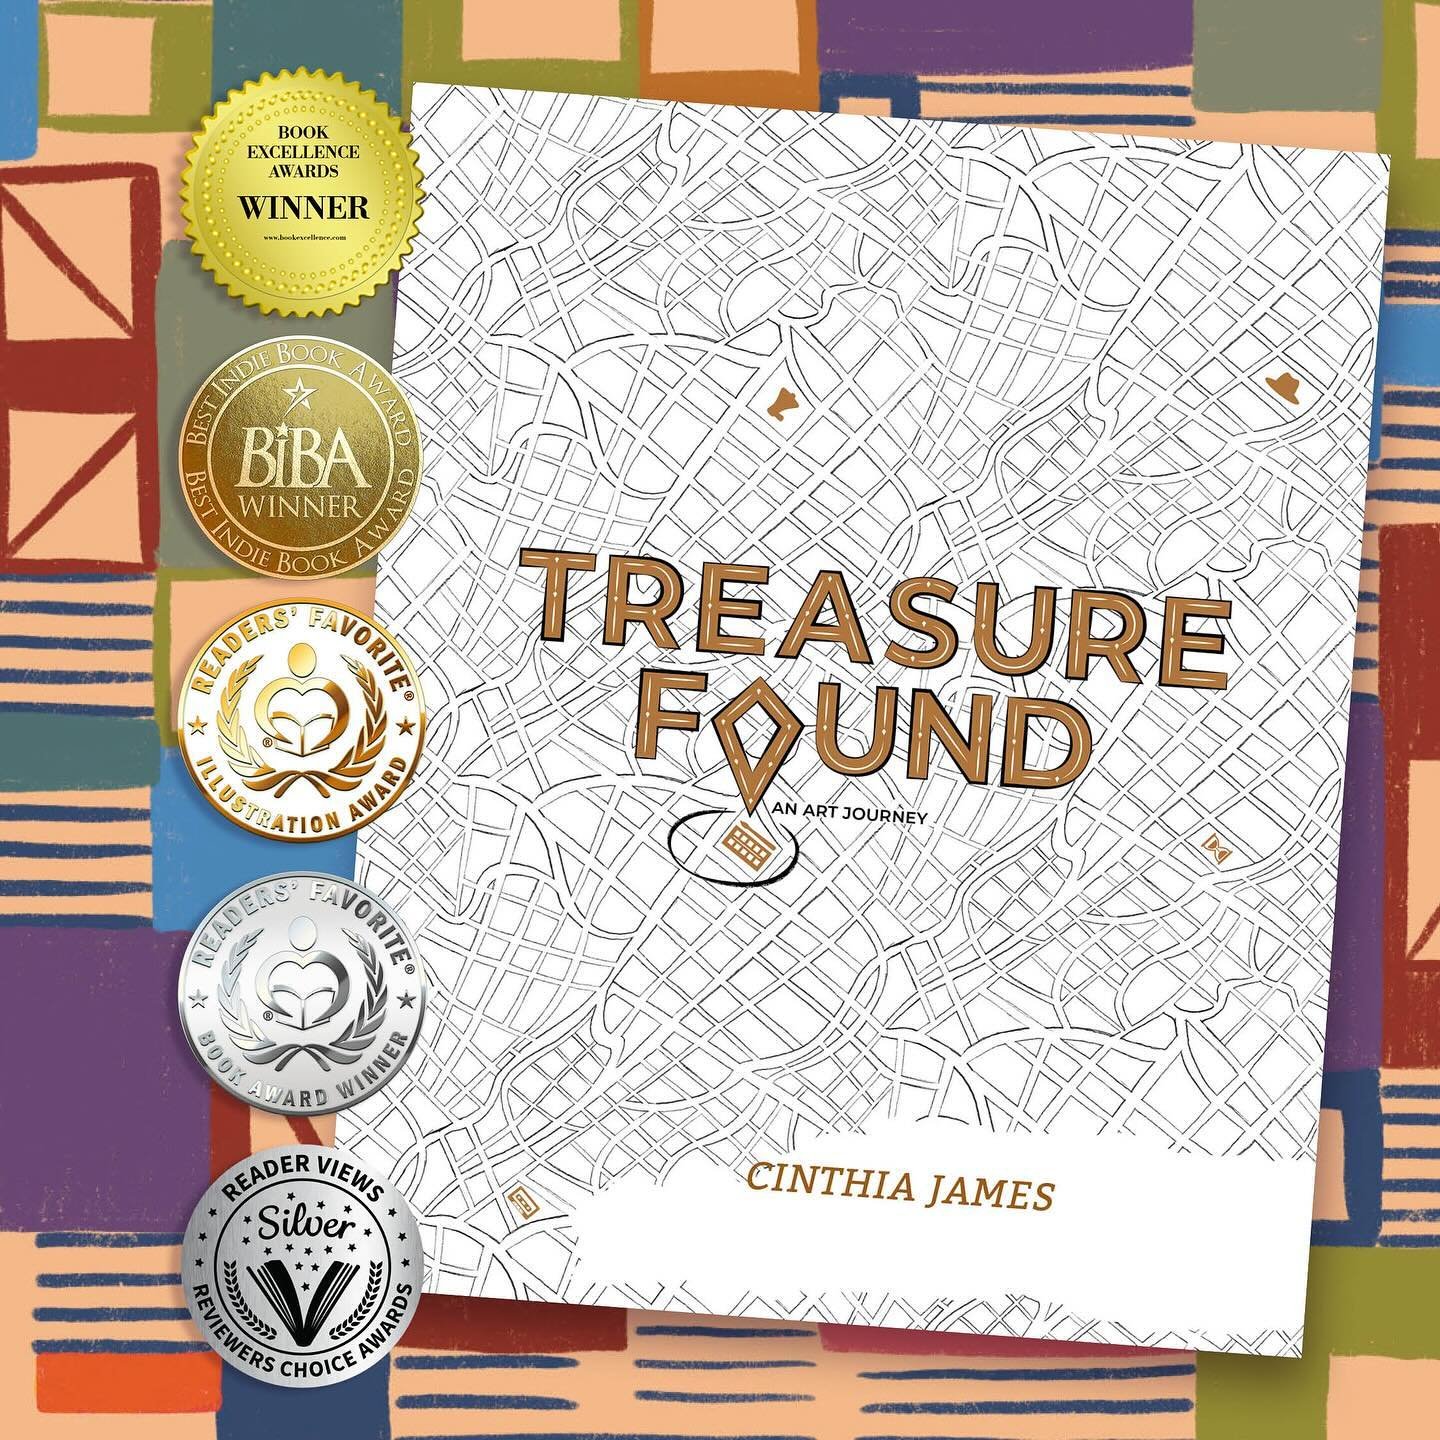 Link in Bio.

Reflecting on the journey of &ldquo;Treasure Found: An Art Journey&rdquo; fills me with immense gratitude. This book, a labor of love and creativity, has been honored with five prestigious awards over the past year. Each accolade not on